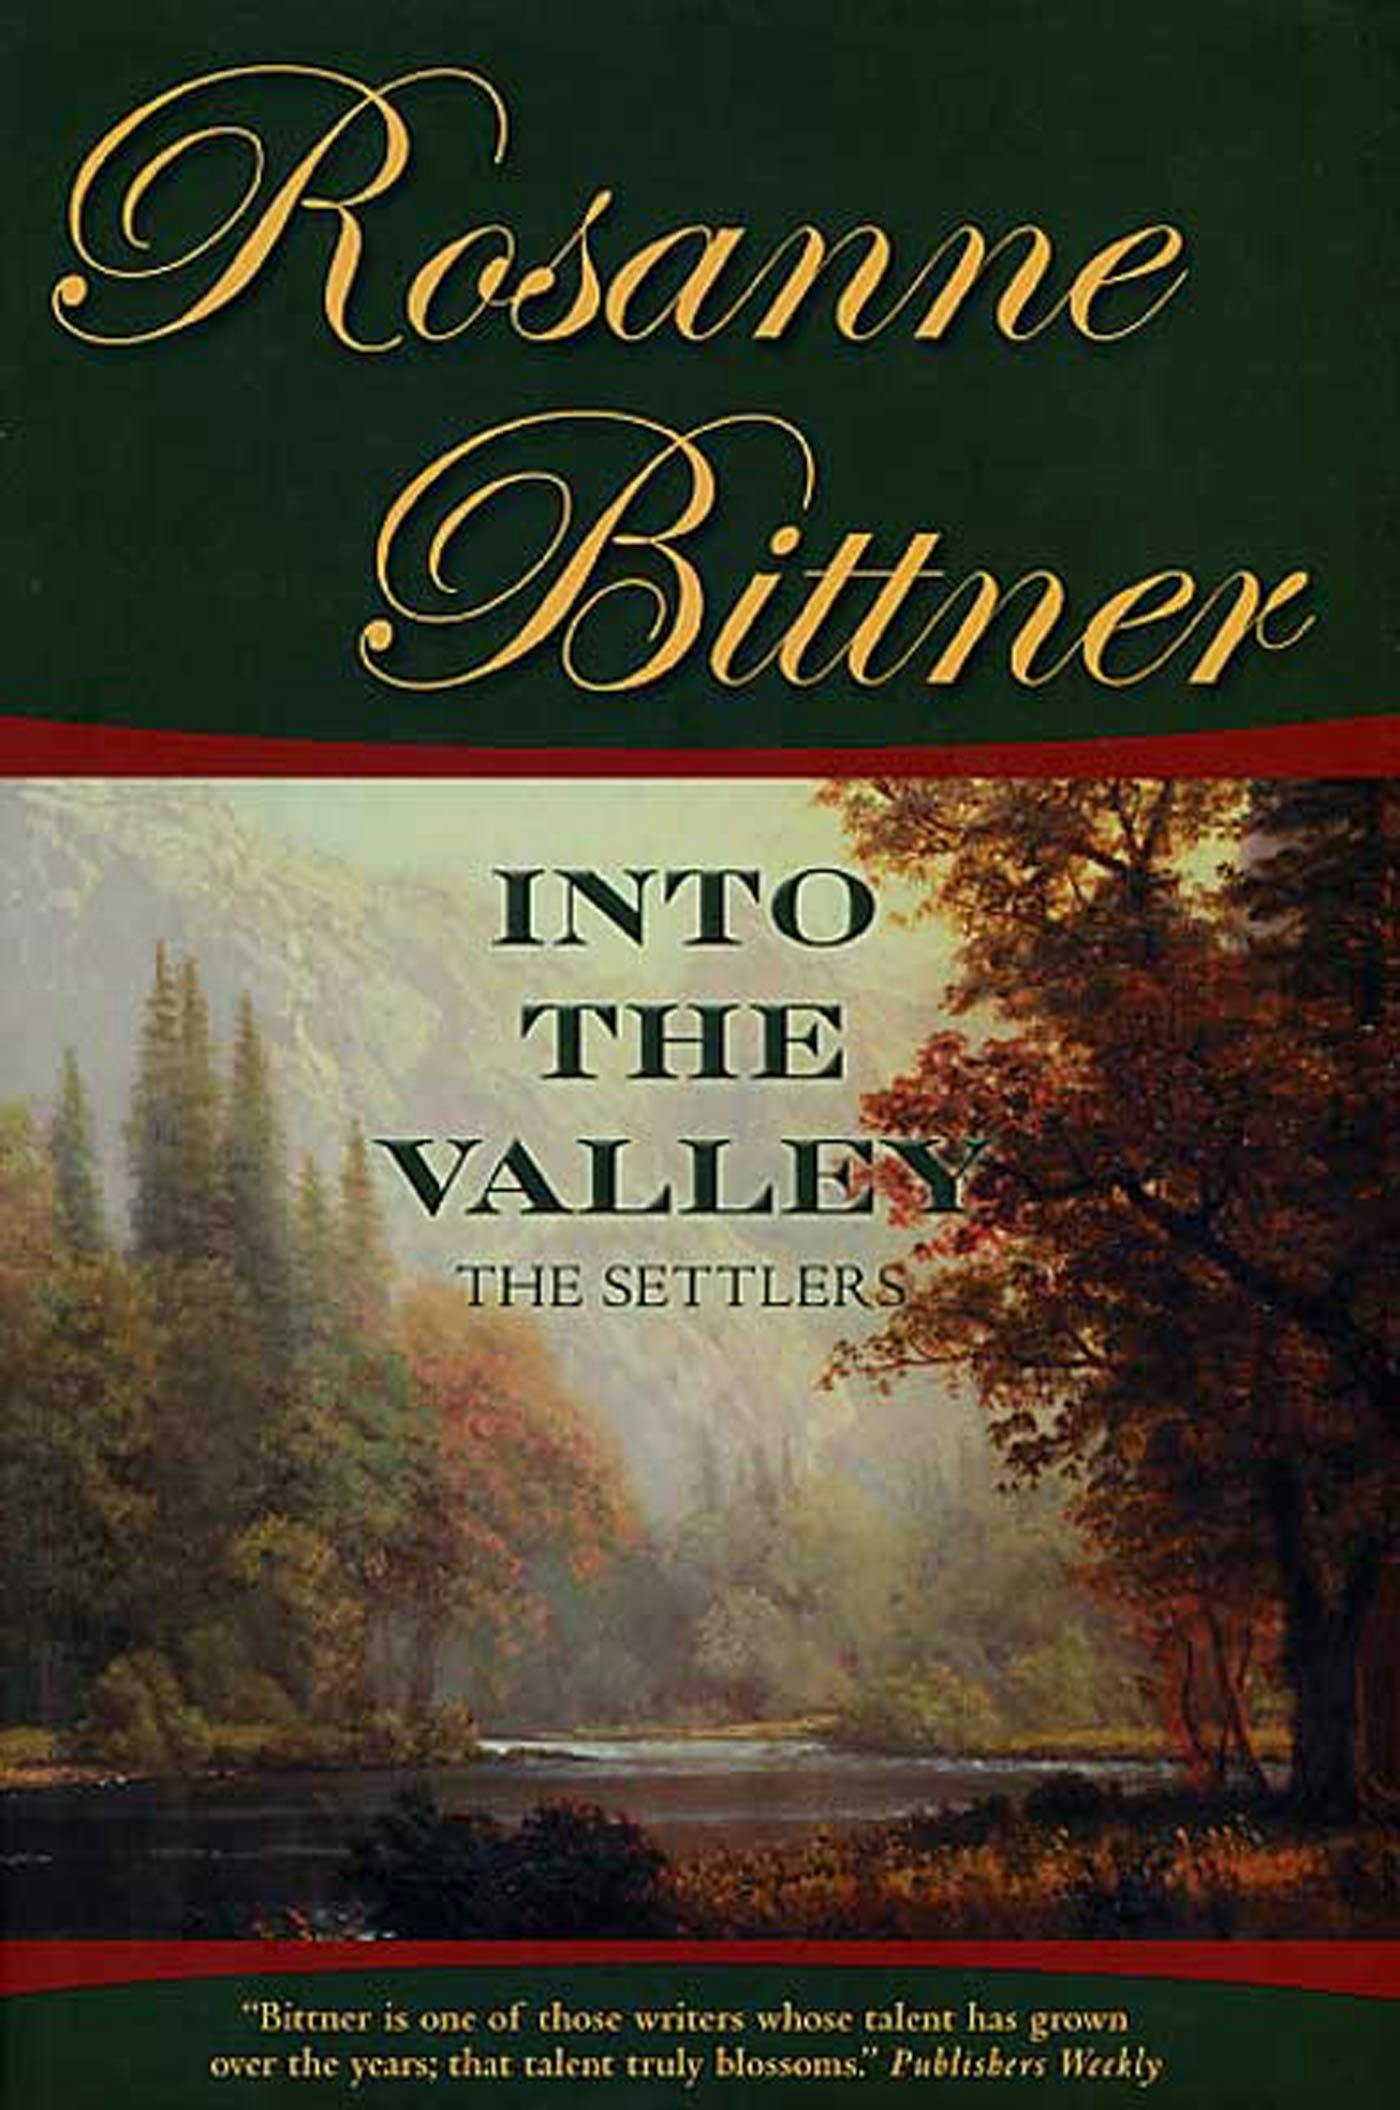 Cover for the book titled as: Into the Valley